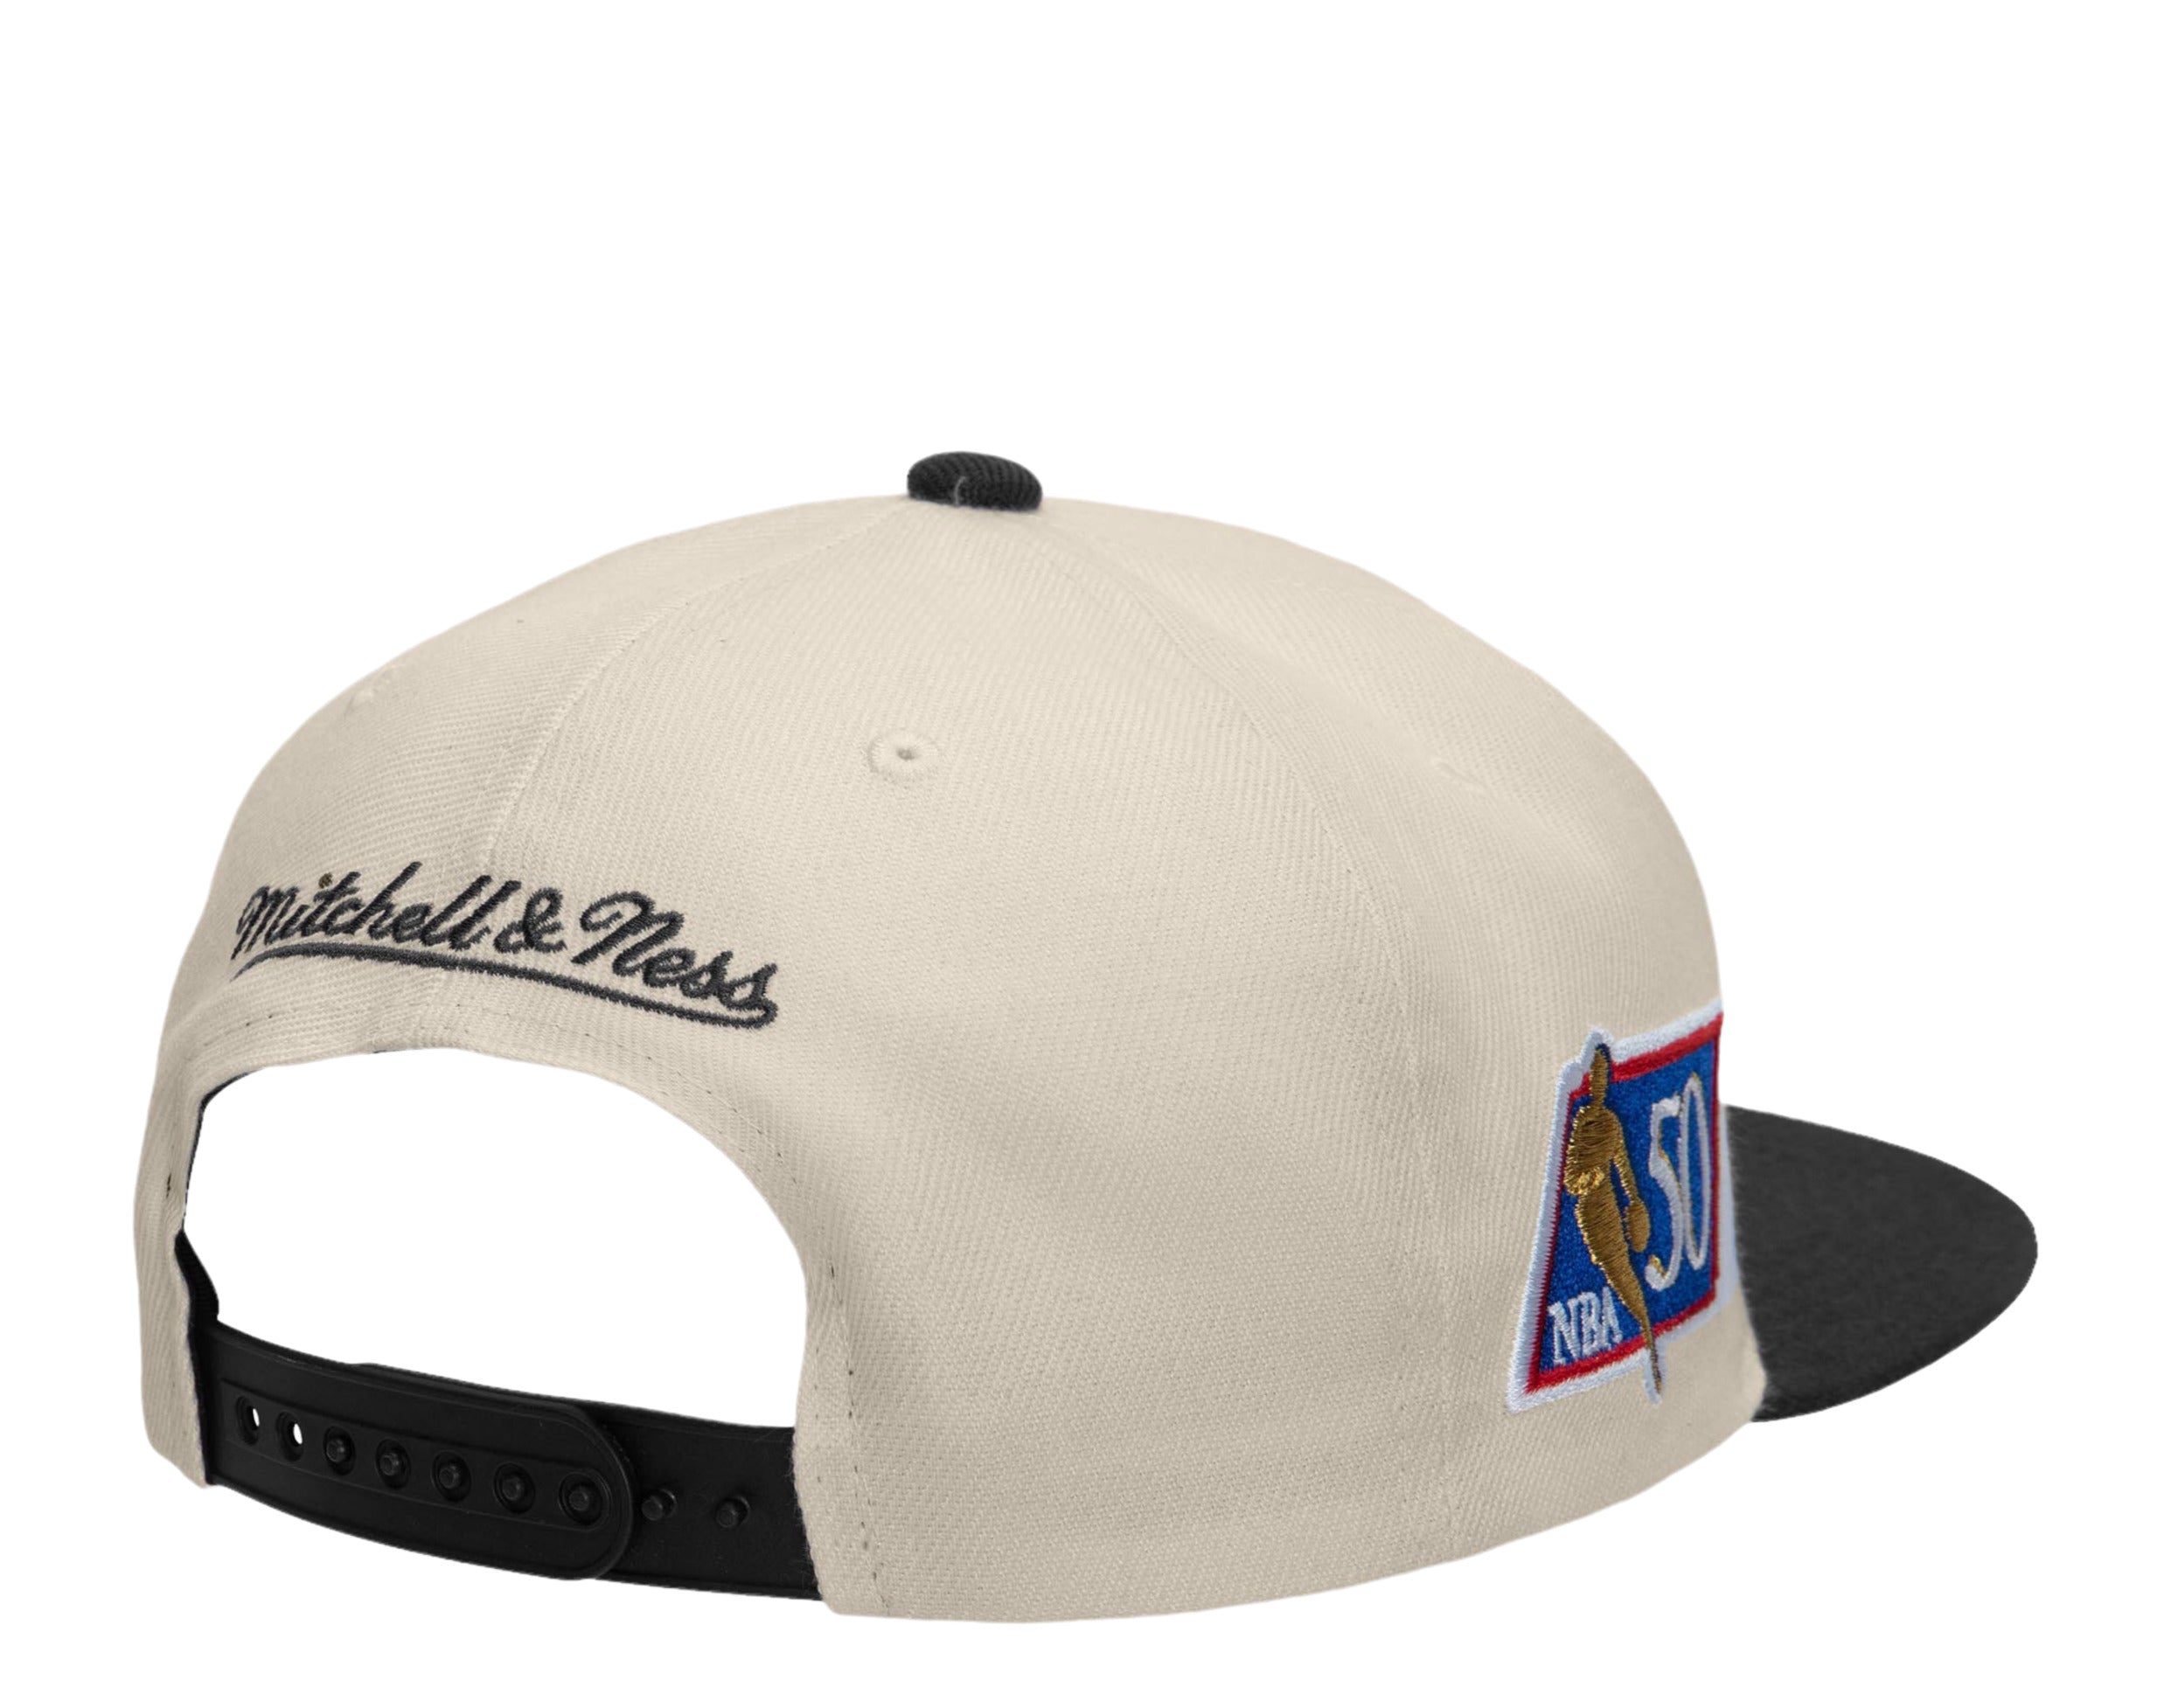 Chicago Bulls Cement Top White/Silver Snapback - Mitchell & Ness cap